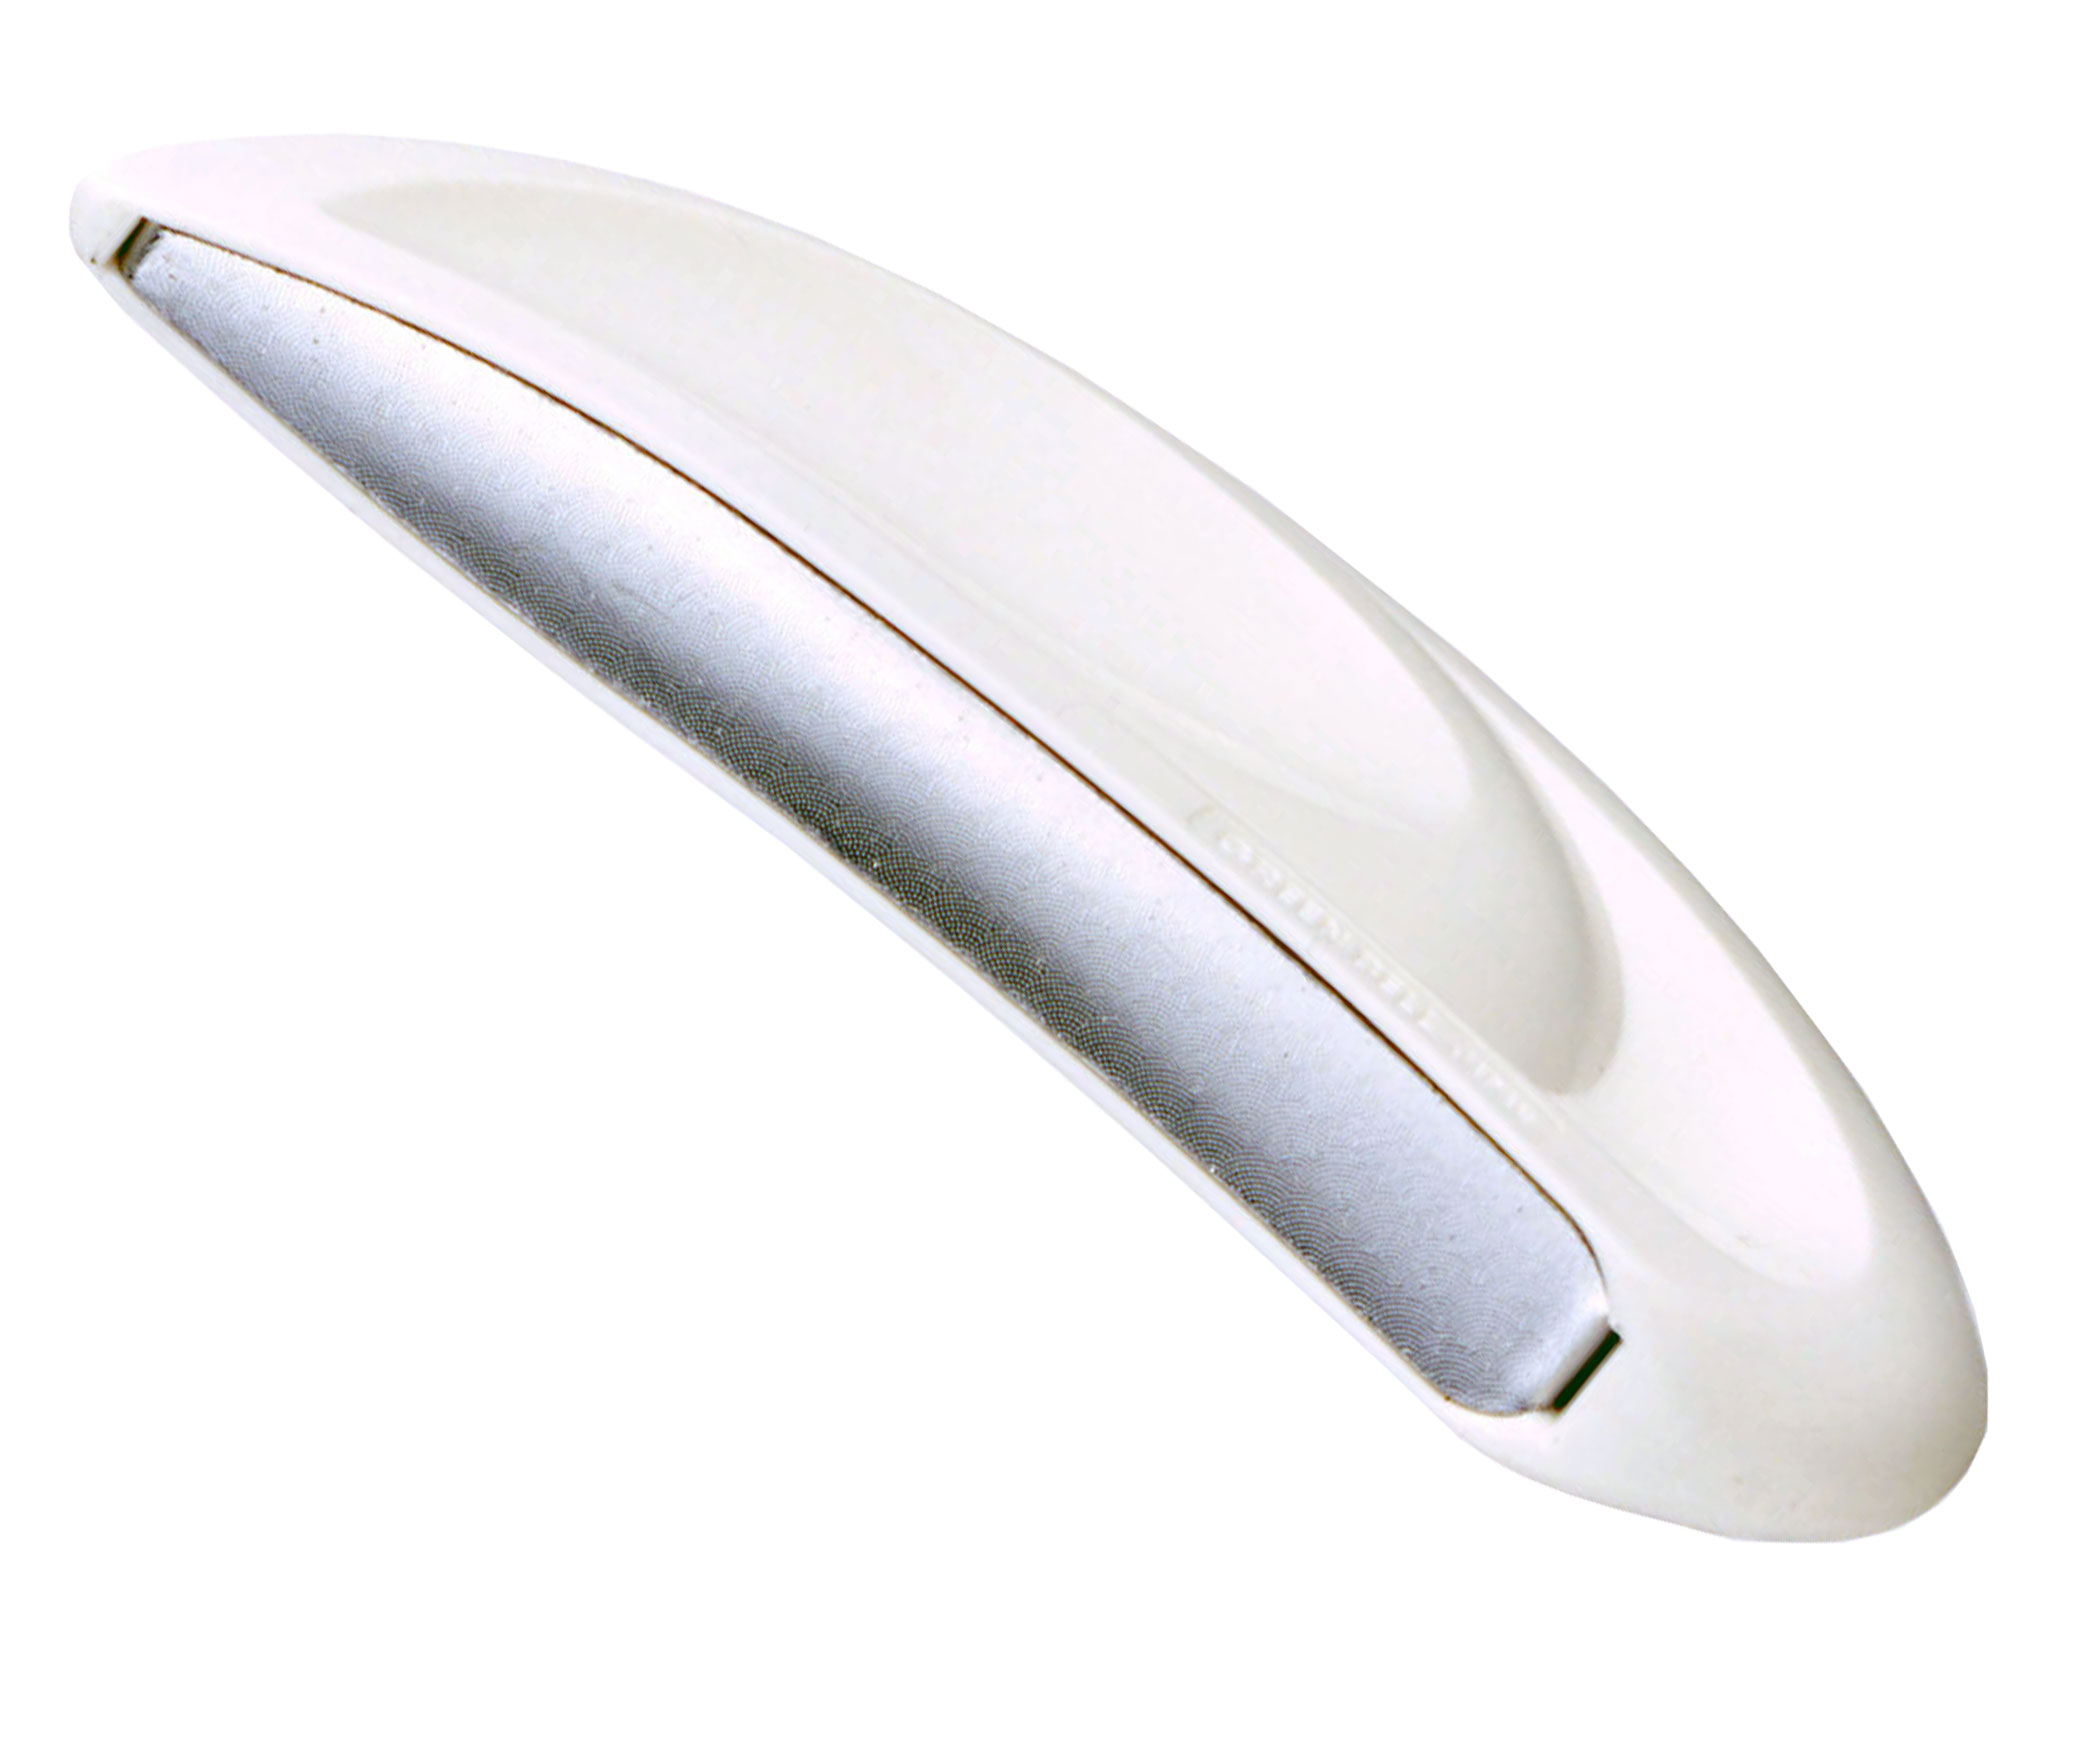 Seki Edge Large Rounded Nail File (SS-405) no poking or scratching